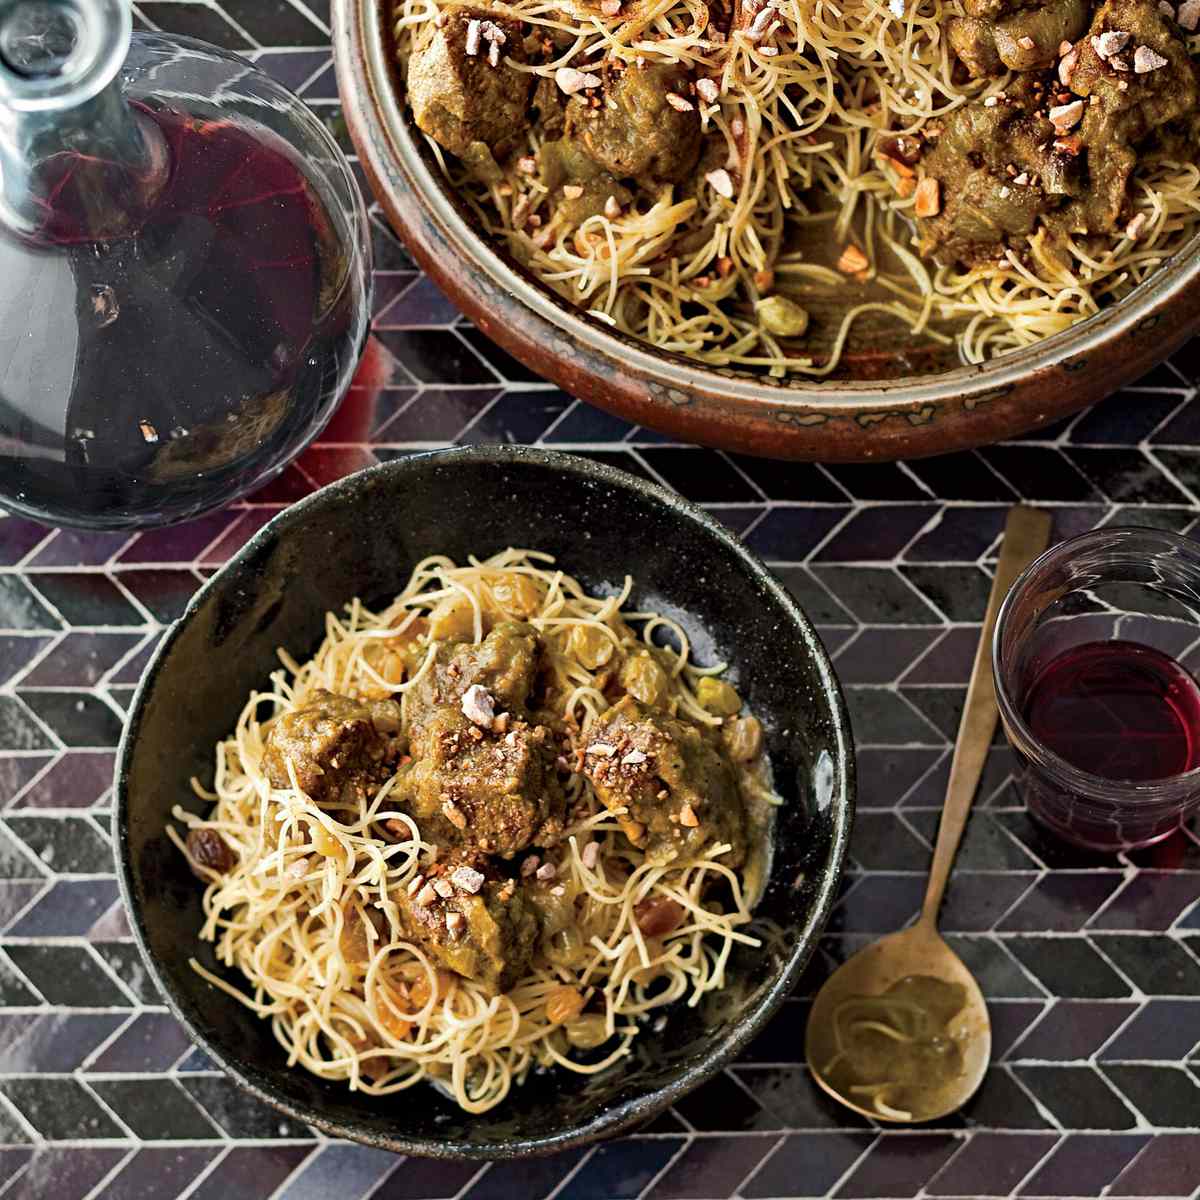 Moroccan Lamb Stew with Noodles